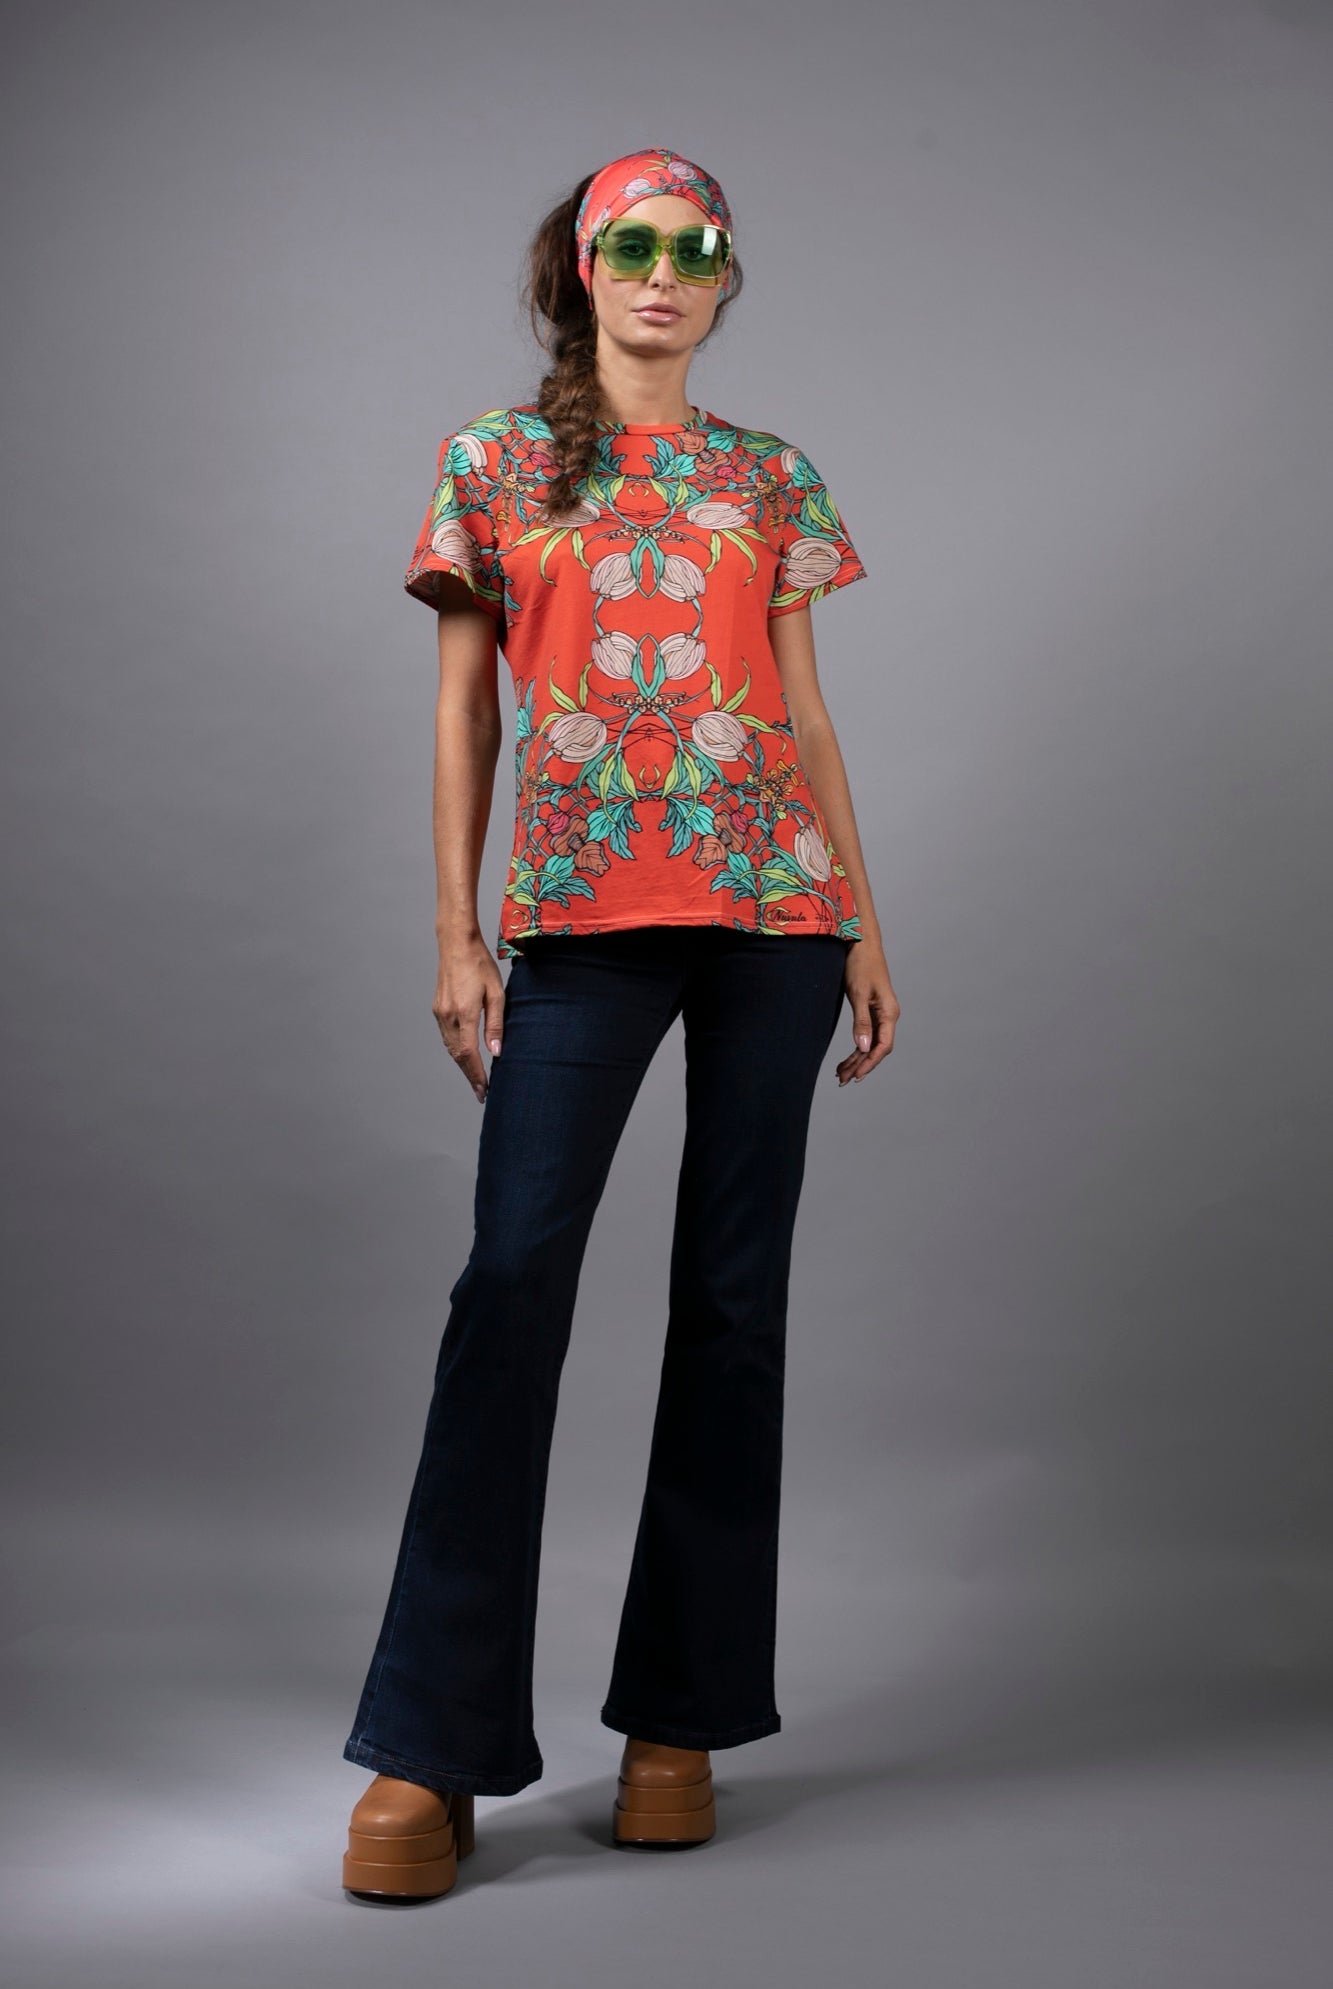 CROCUS RED AND AQUA FLORAL RED T-SHIRT BY NUVULA